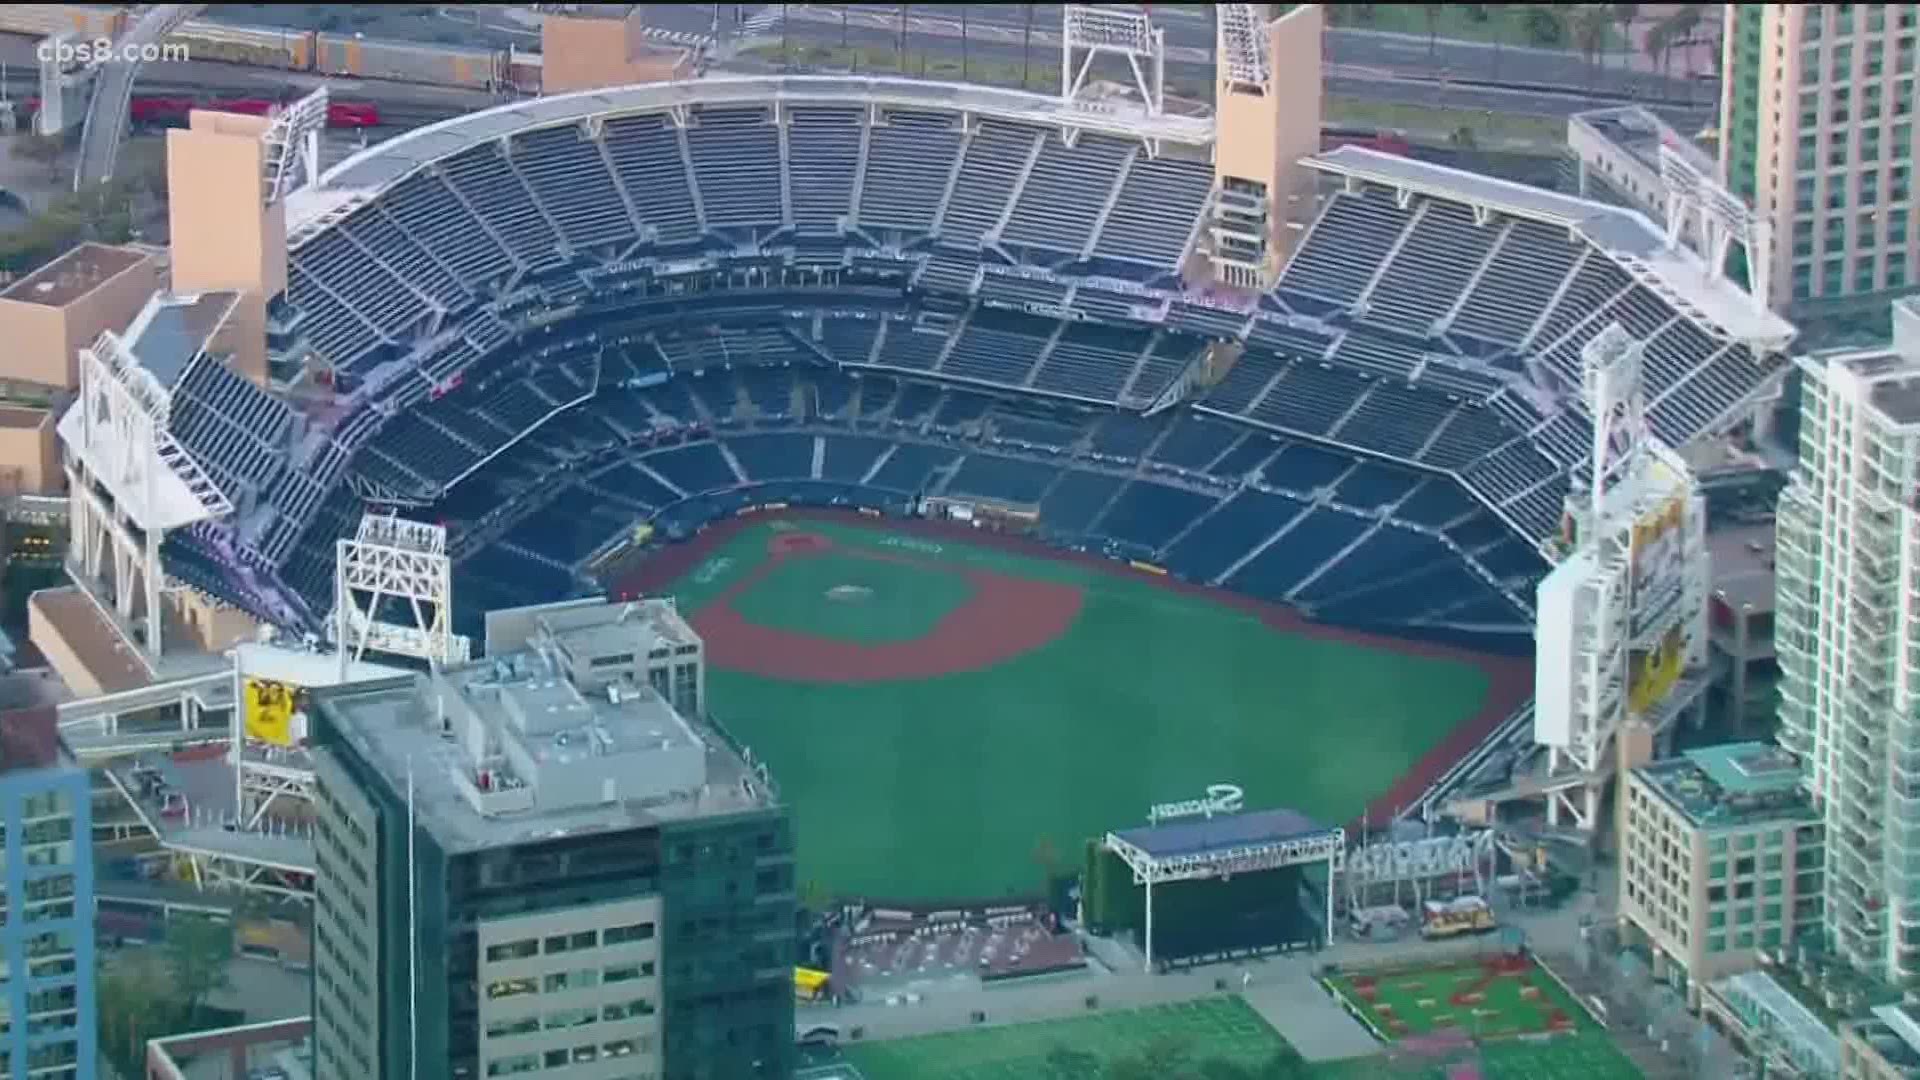 Padres Homestand 5 at Petco Park. Returning from a seven-day